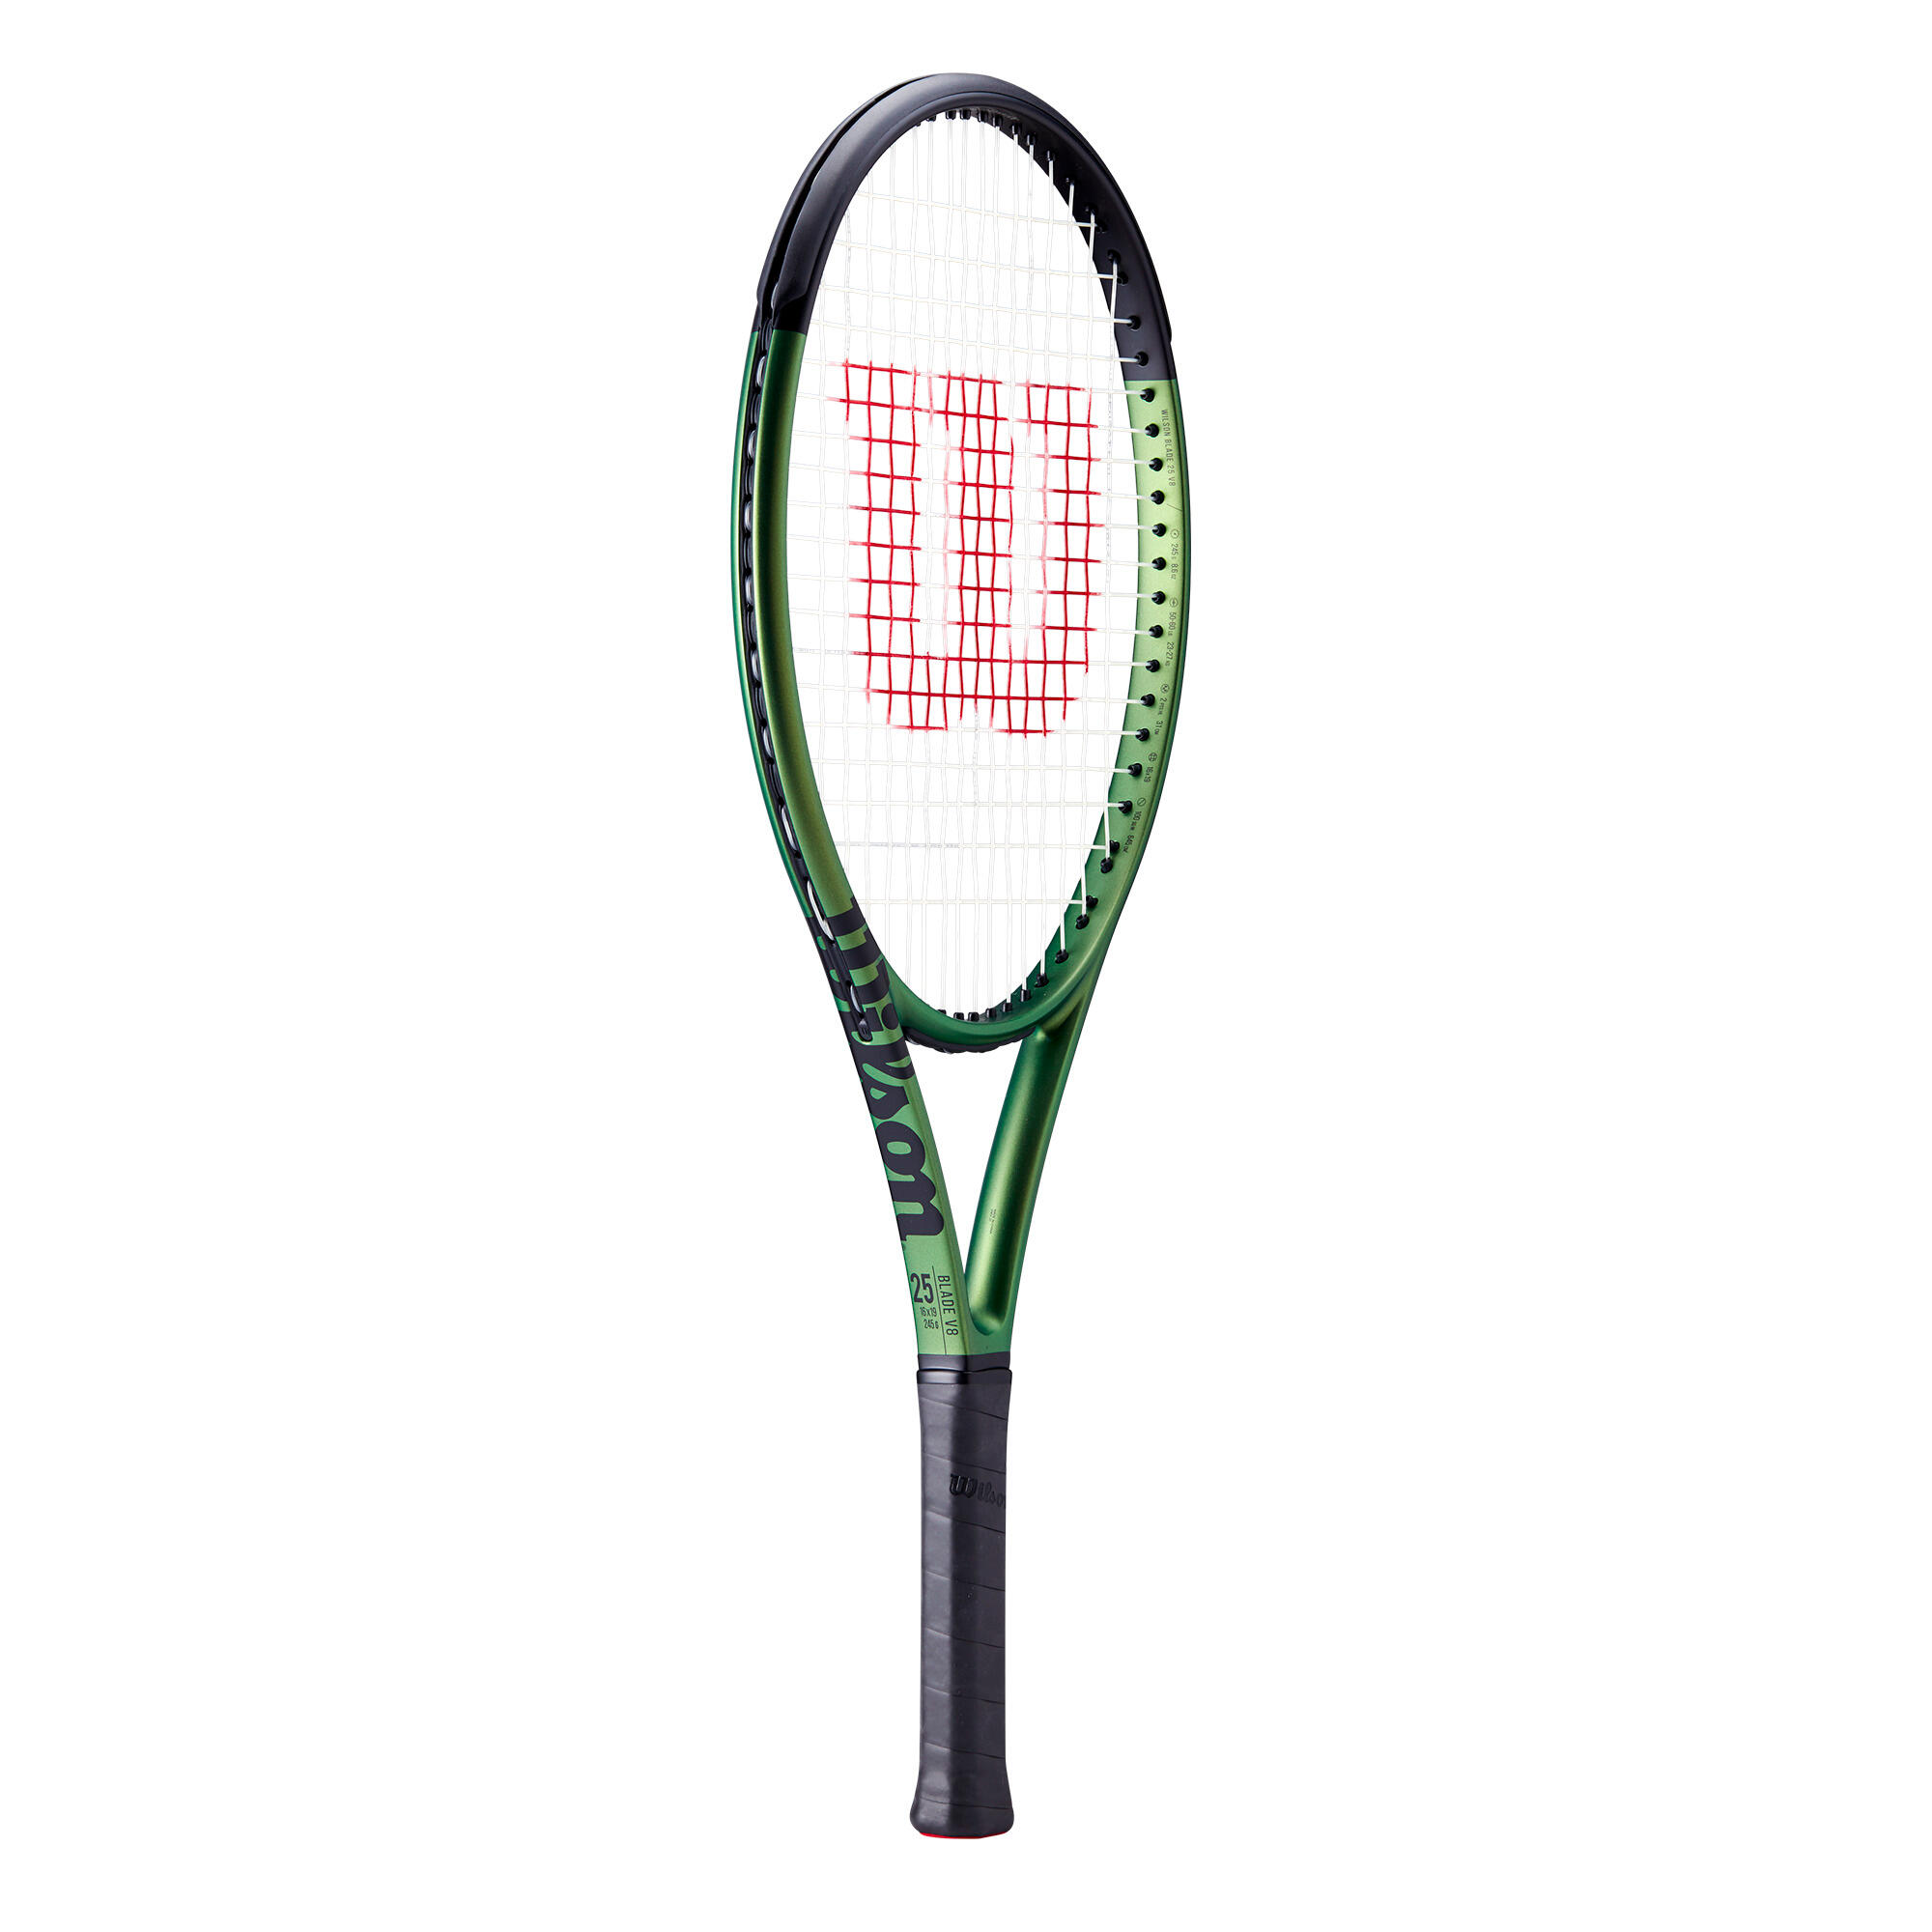 Kids' Tennis Racket Blade V8 25 inches - Green/Copper 2/3